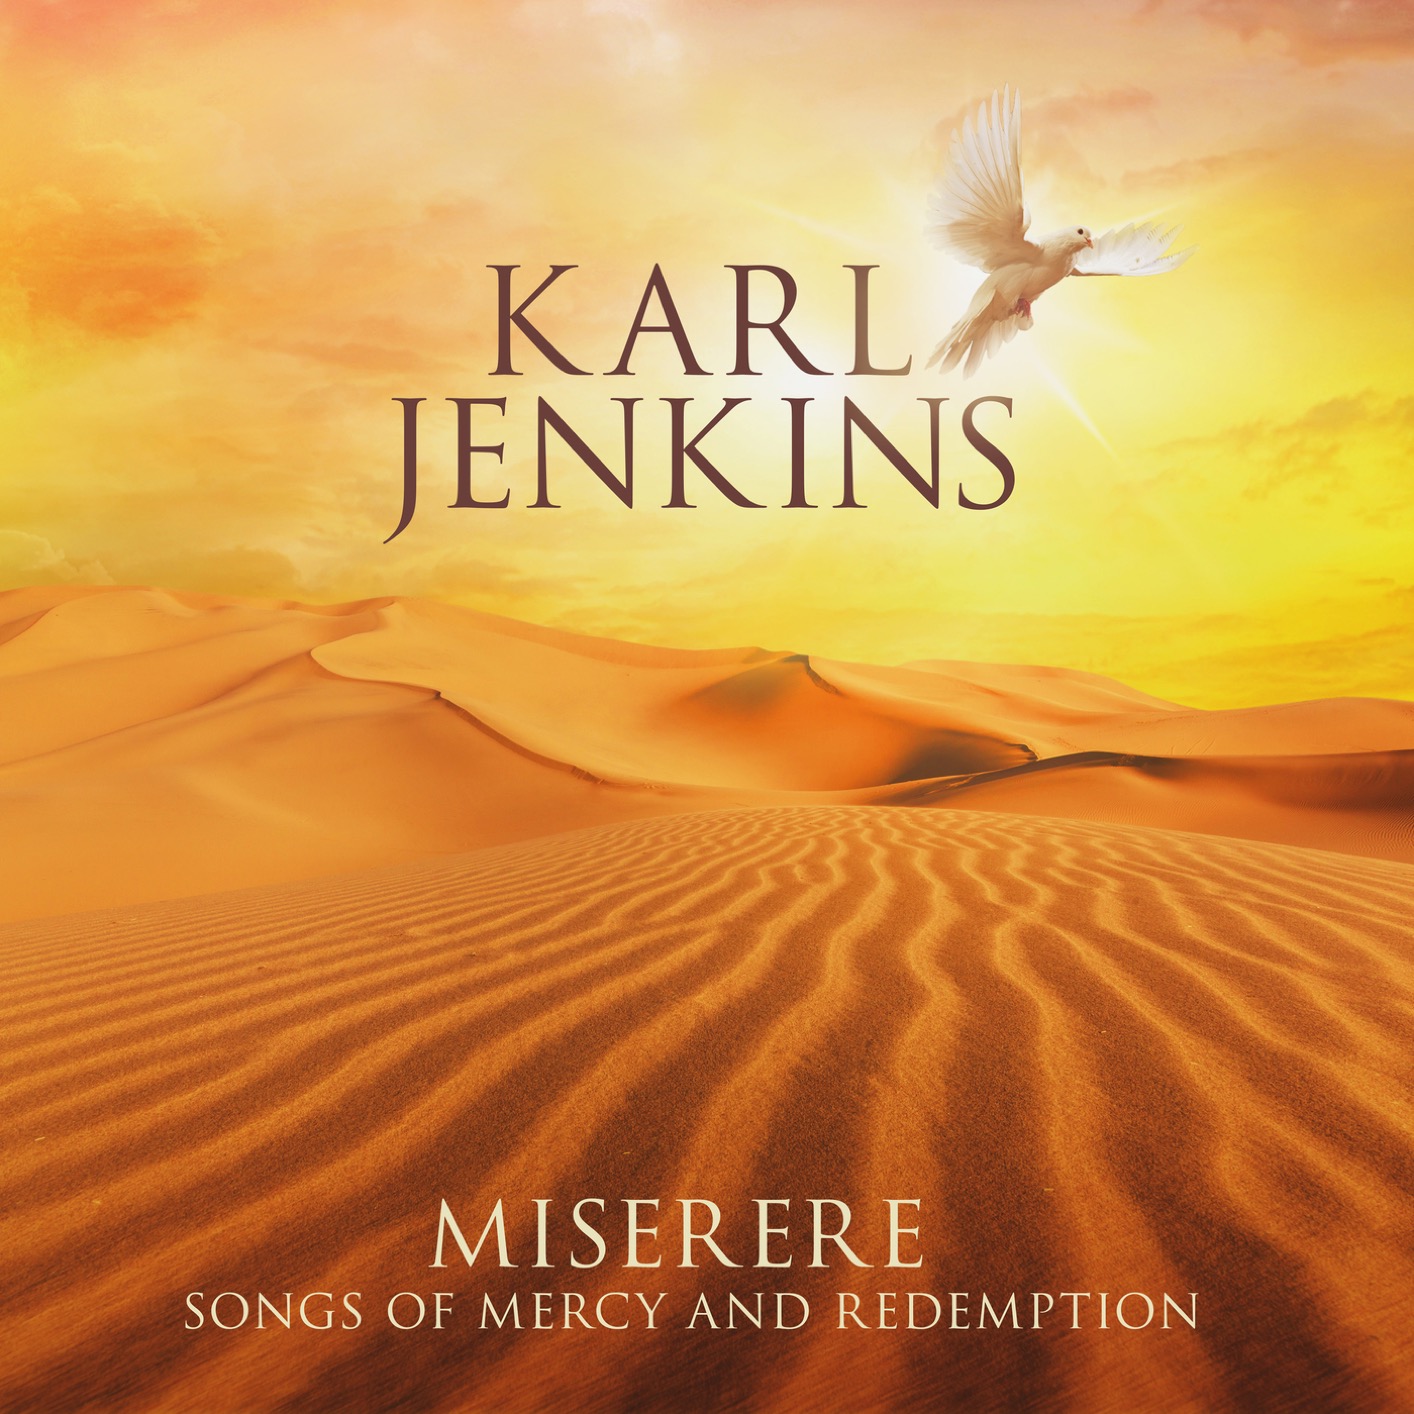 Karl Jenkins – Miserere: Songs of Mercy and Redemption (2019) [FLAC 24bit/48kHz]